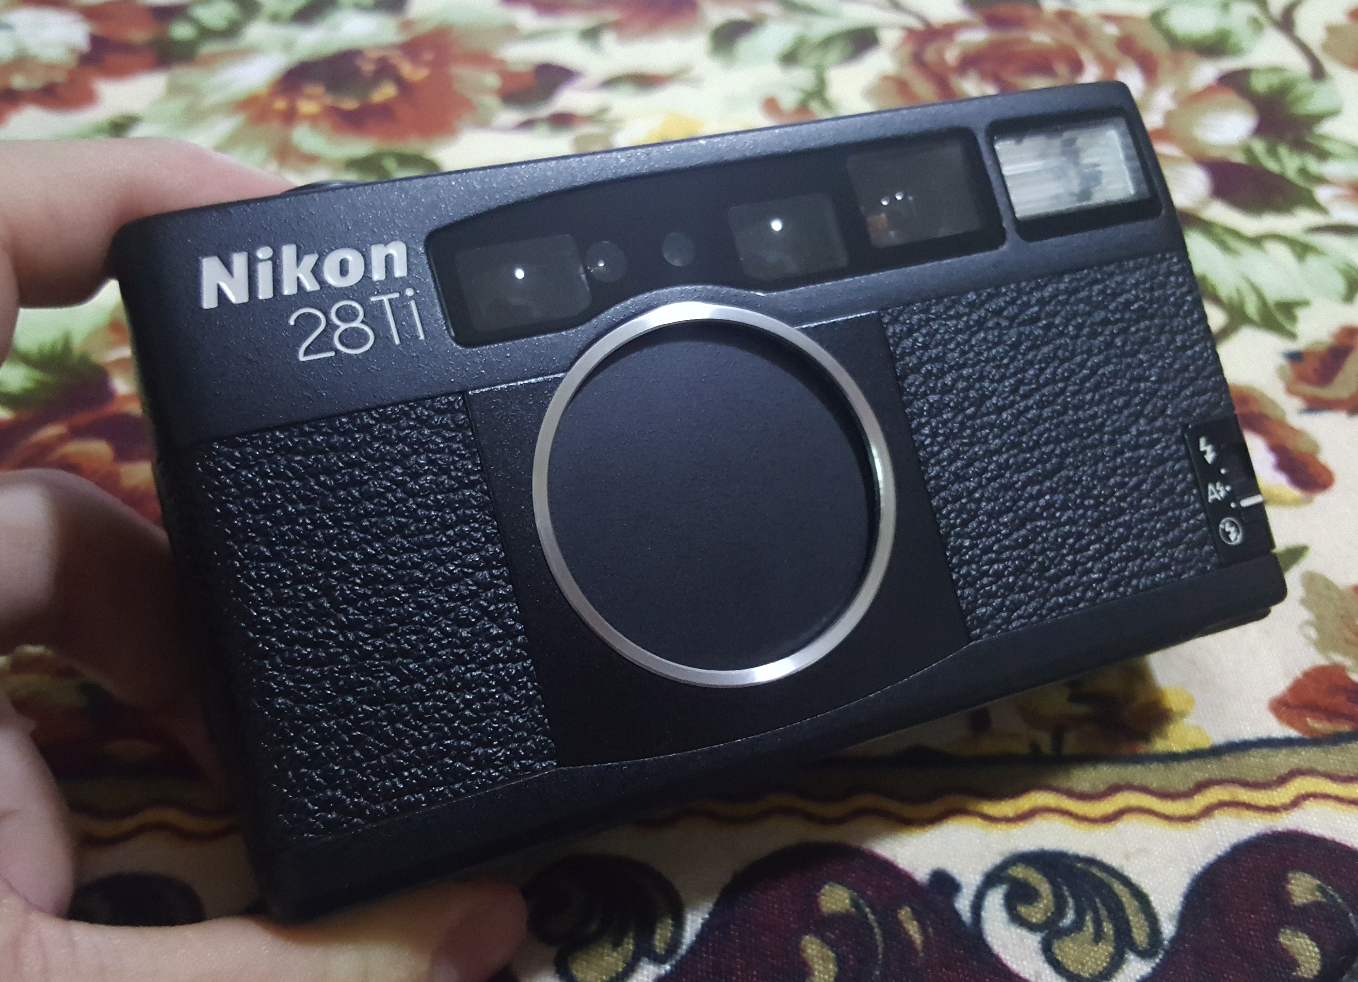  Nikon 28TI with excellent quality 